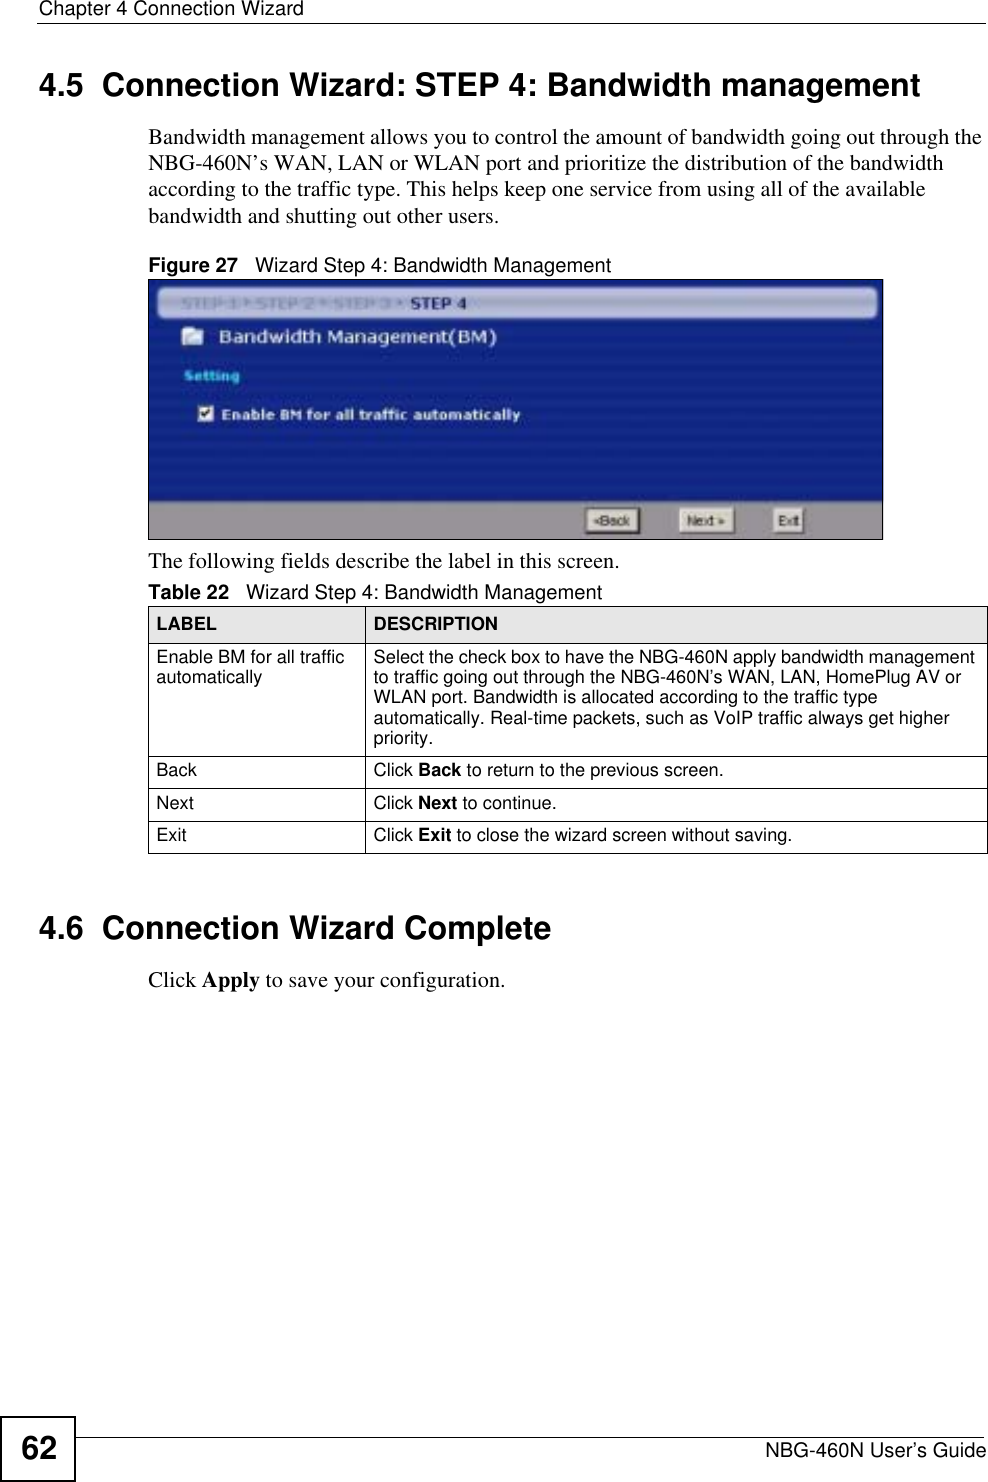 Chapter 4 Connection WizardNBG-460N User’s Guide624.5  Connection Wizard: STEP 4: Bandwidth managementBandwidth management allows you to control the amount of bandwidth going out through the NBG-460N’s WAN, LAN or WLAN port and prioritize the distribution of the bandwidth according to the traffic type. This helps keep one service from using all of the available bandwidth and shutting out other users.Figure 27   Wizard Step 4: Bandwidth Management The following fields describe the label in this screen.4.6  Connection Wizard CompleteClick Apply to save your configuration.Table 22   Wizard Step 4: Bandwidth ManagementLABEL DESCRIPTIONEnable BM for all traffic automatically Select the check box to have the NBG-460N apply bandwidth management to traffic going out through the NBG-460N’s WAN, LAN, HomePlug AV or WLAN port. Bandwidth is allocated according to the traffic type automatically. Real-time packets, such as VoIP traffic always get higher priority.Back Click Back to return to the previous screen.Next Click Next to continue. Exit Click Exit to close the wizard screen without saving.